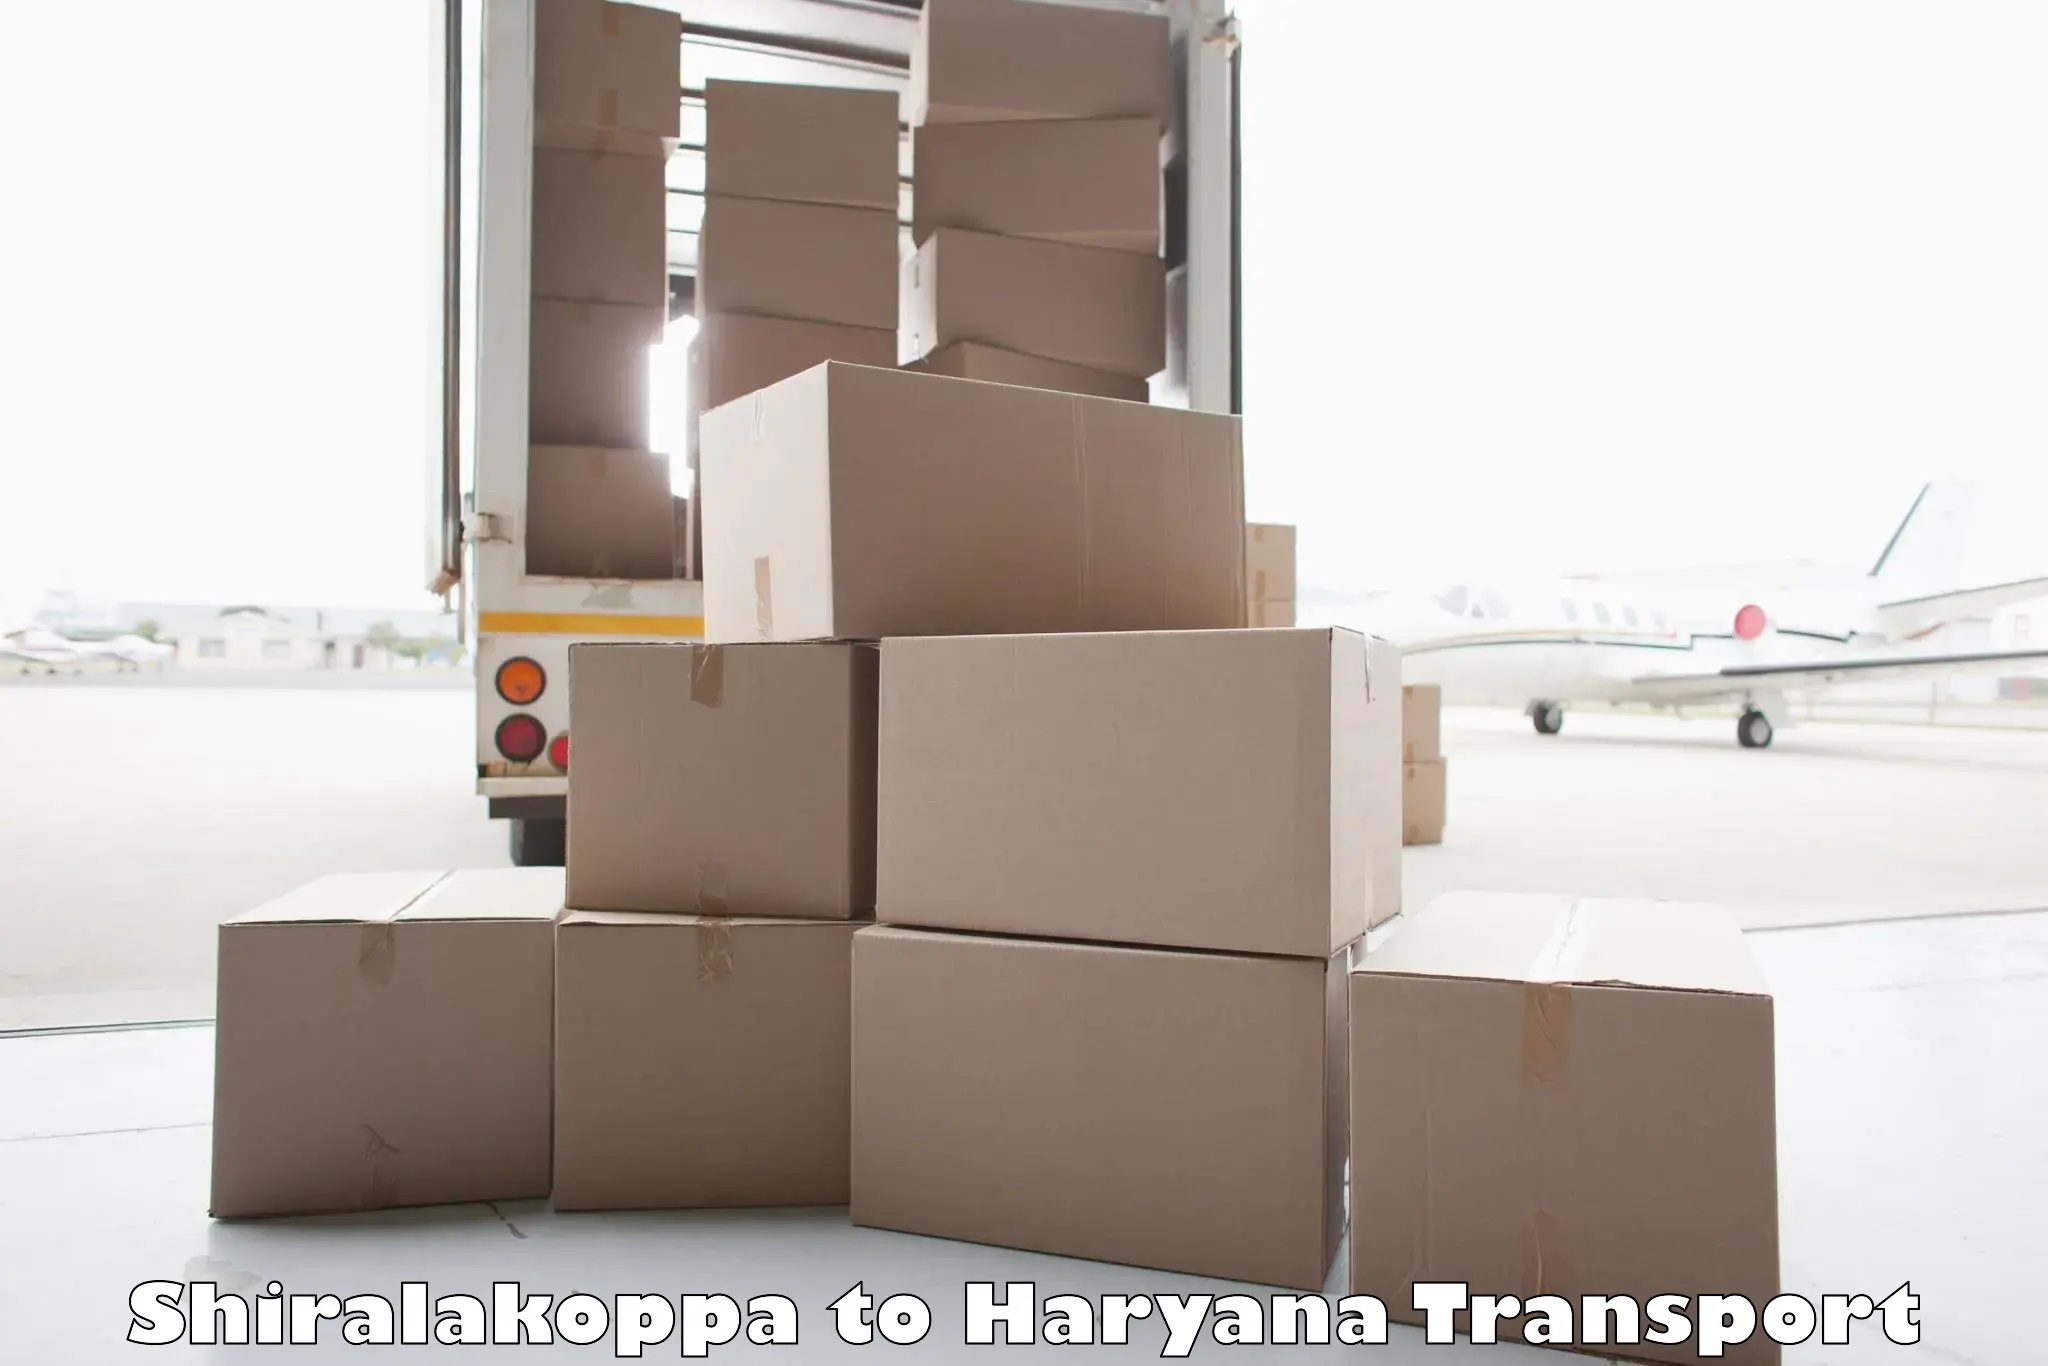 Container transportation services Shiralakoppa to NCR Haryana